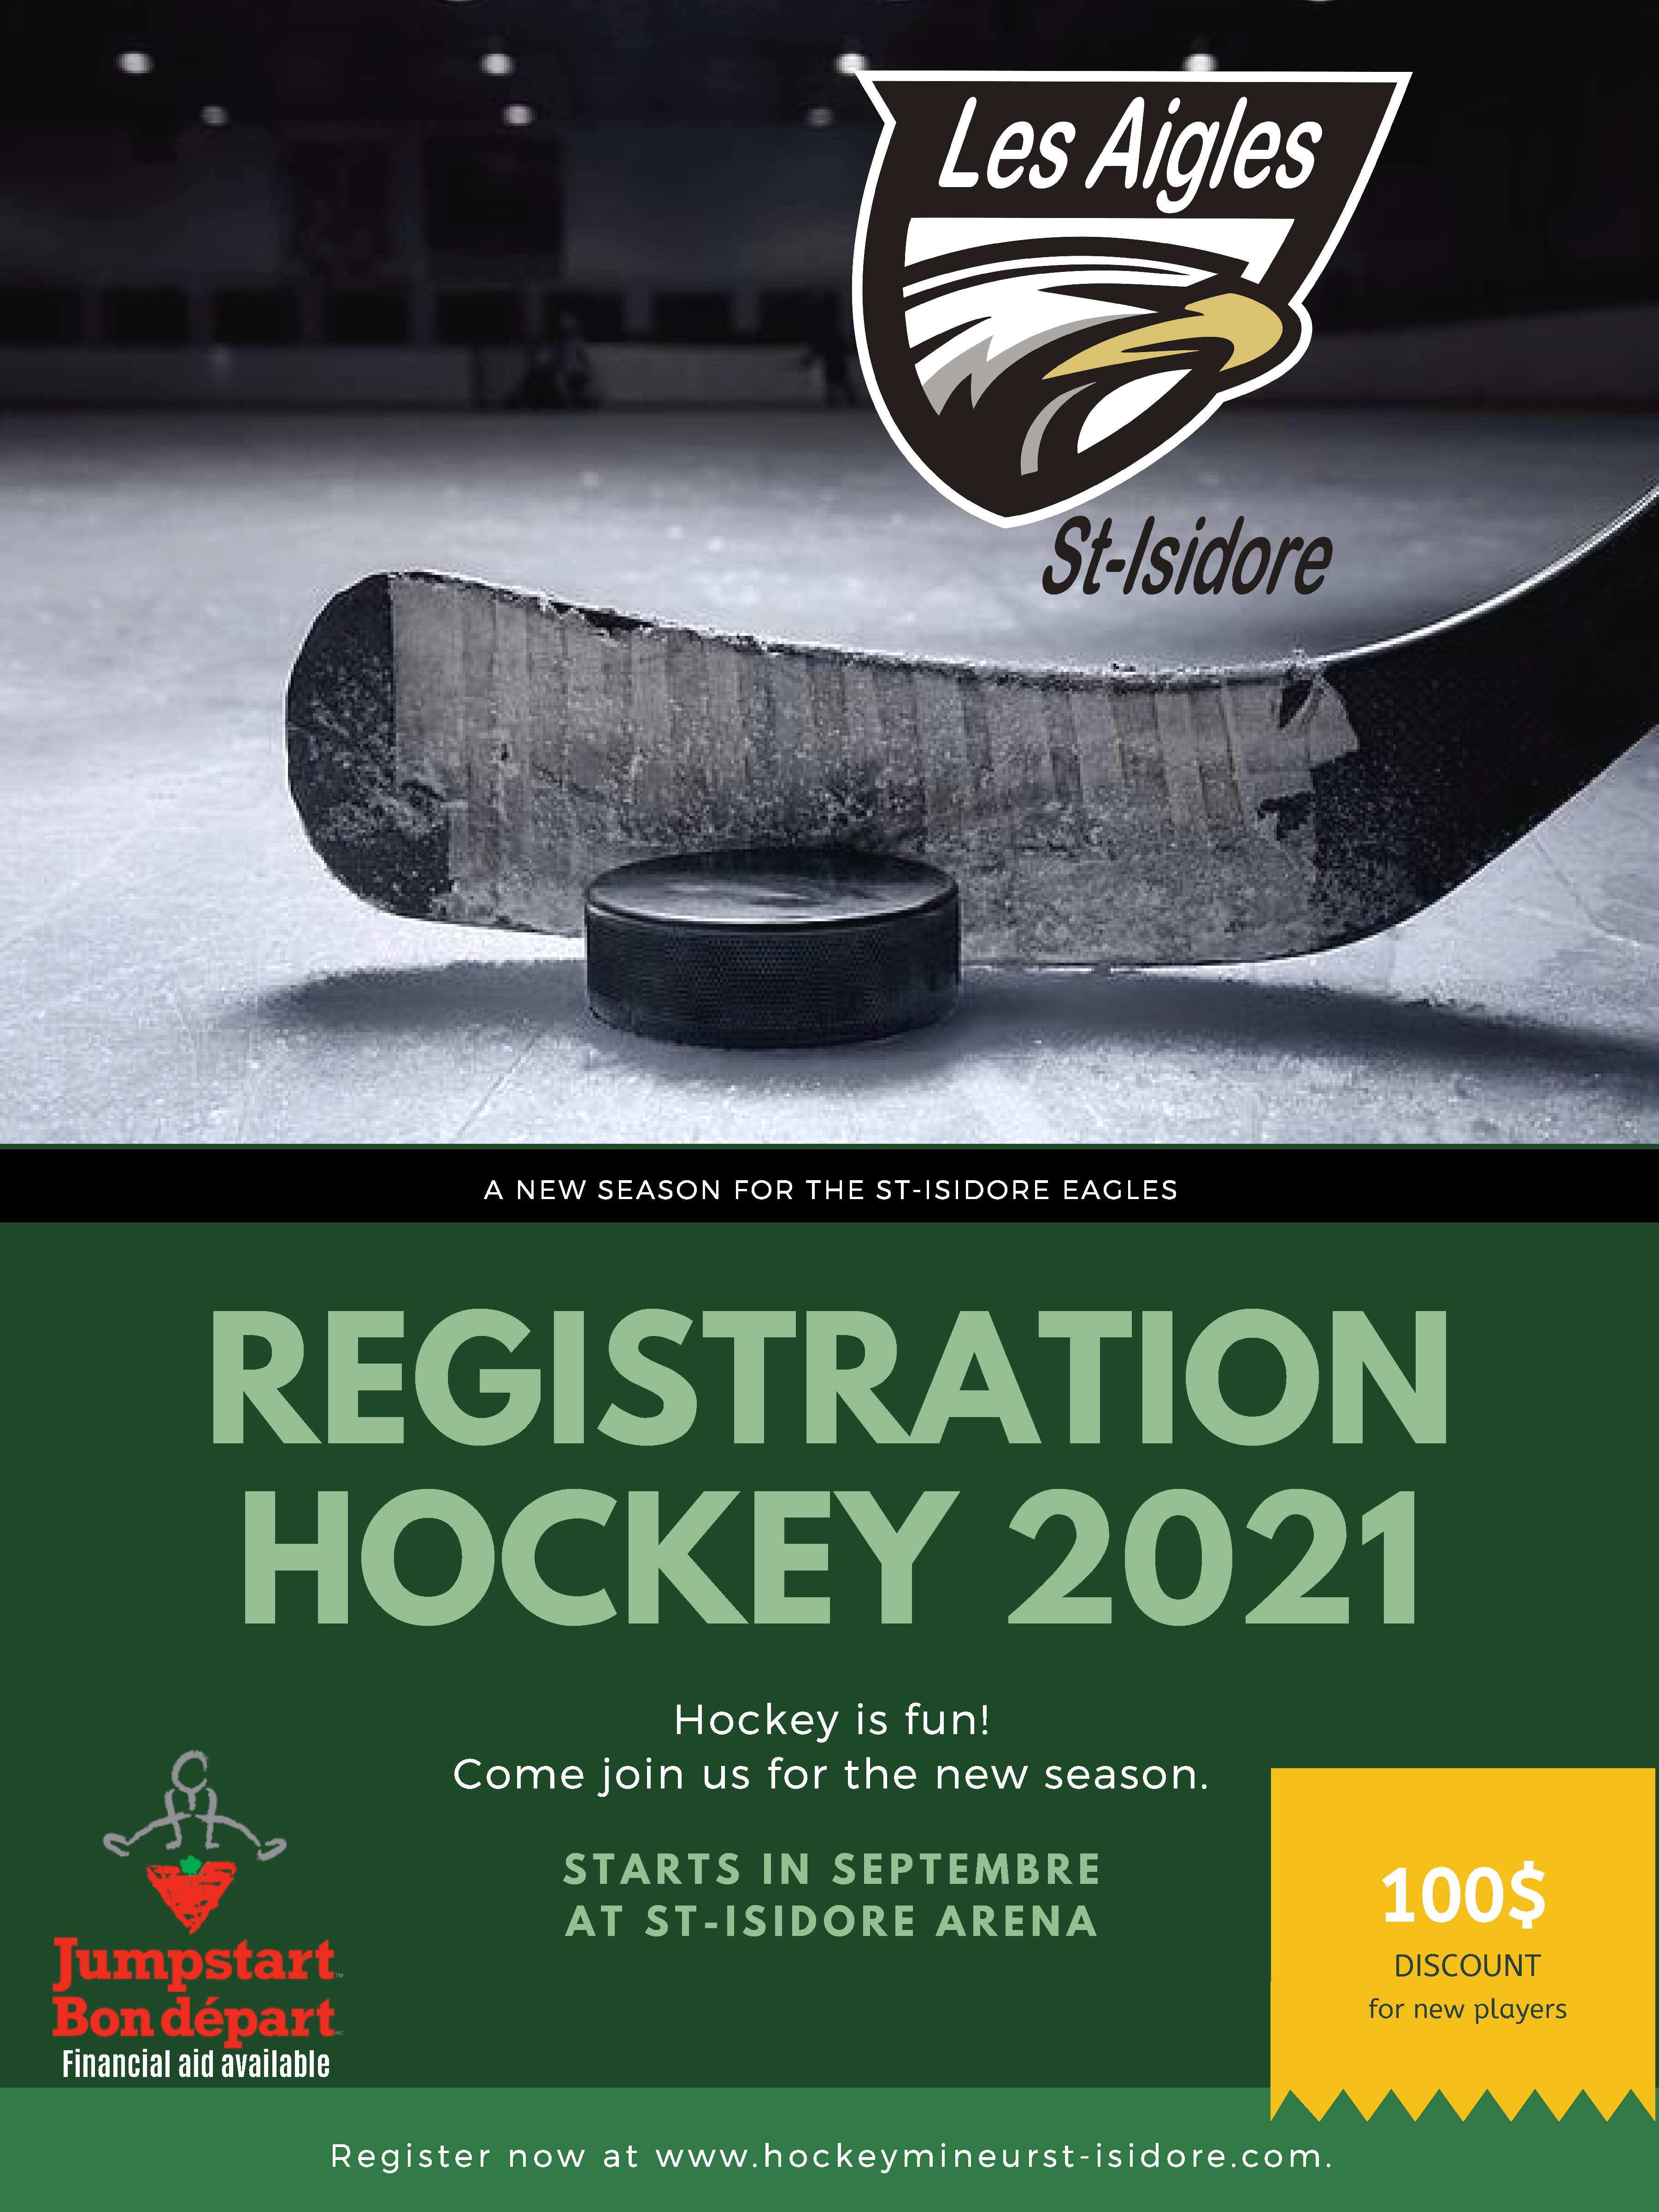 Register for the St-Isidore Eagles now at www.hockeymineurst-isidore.com